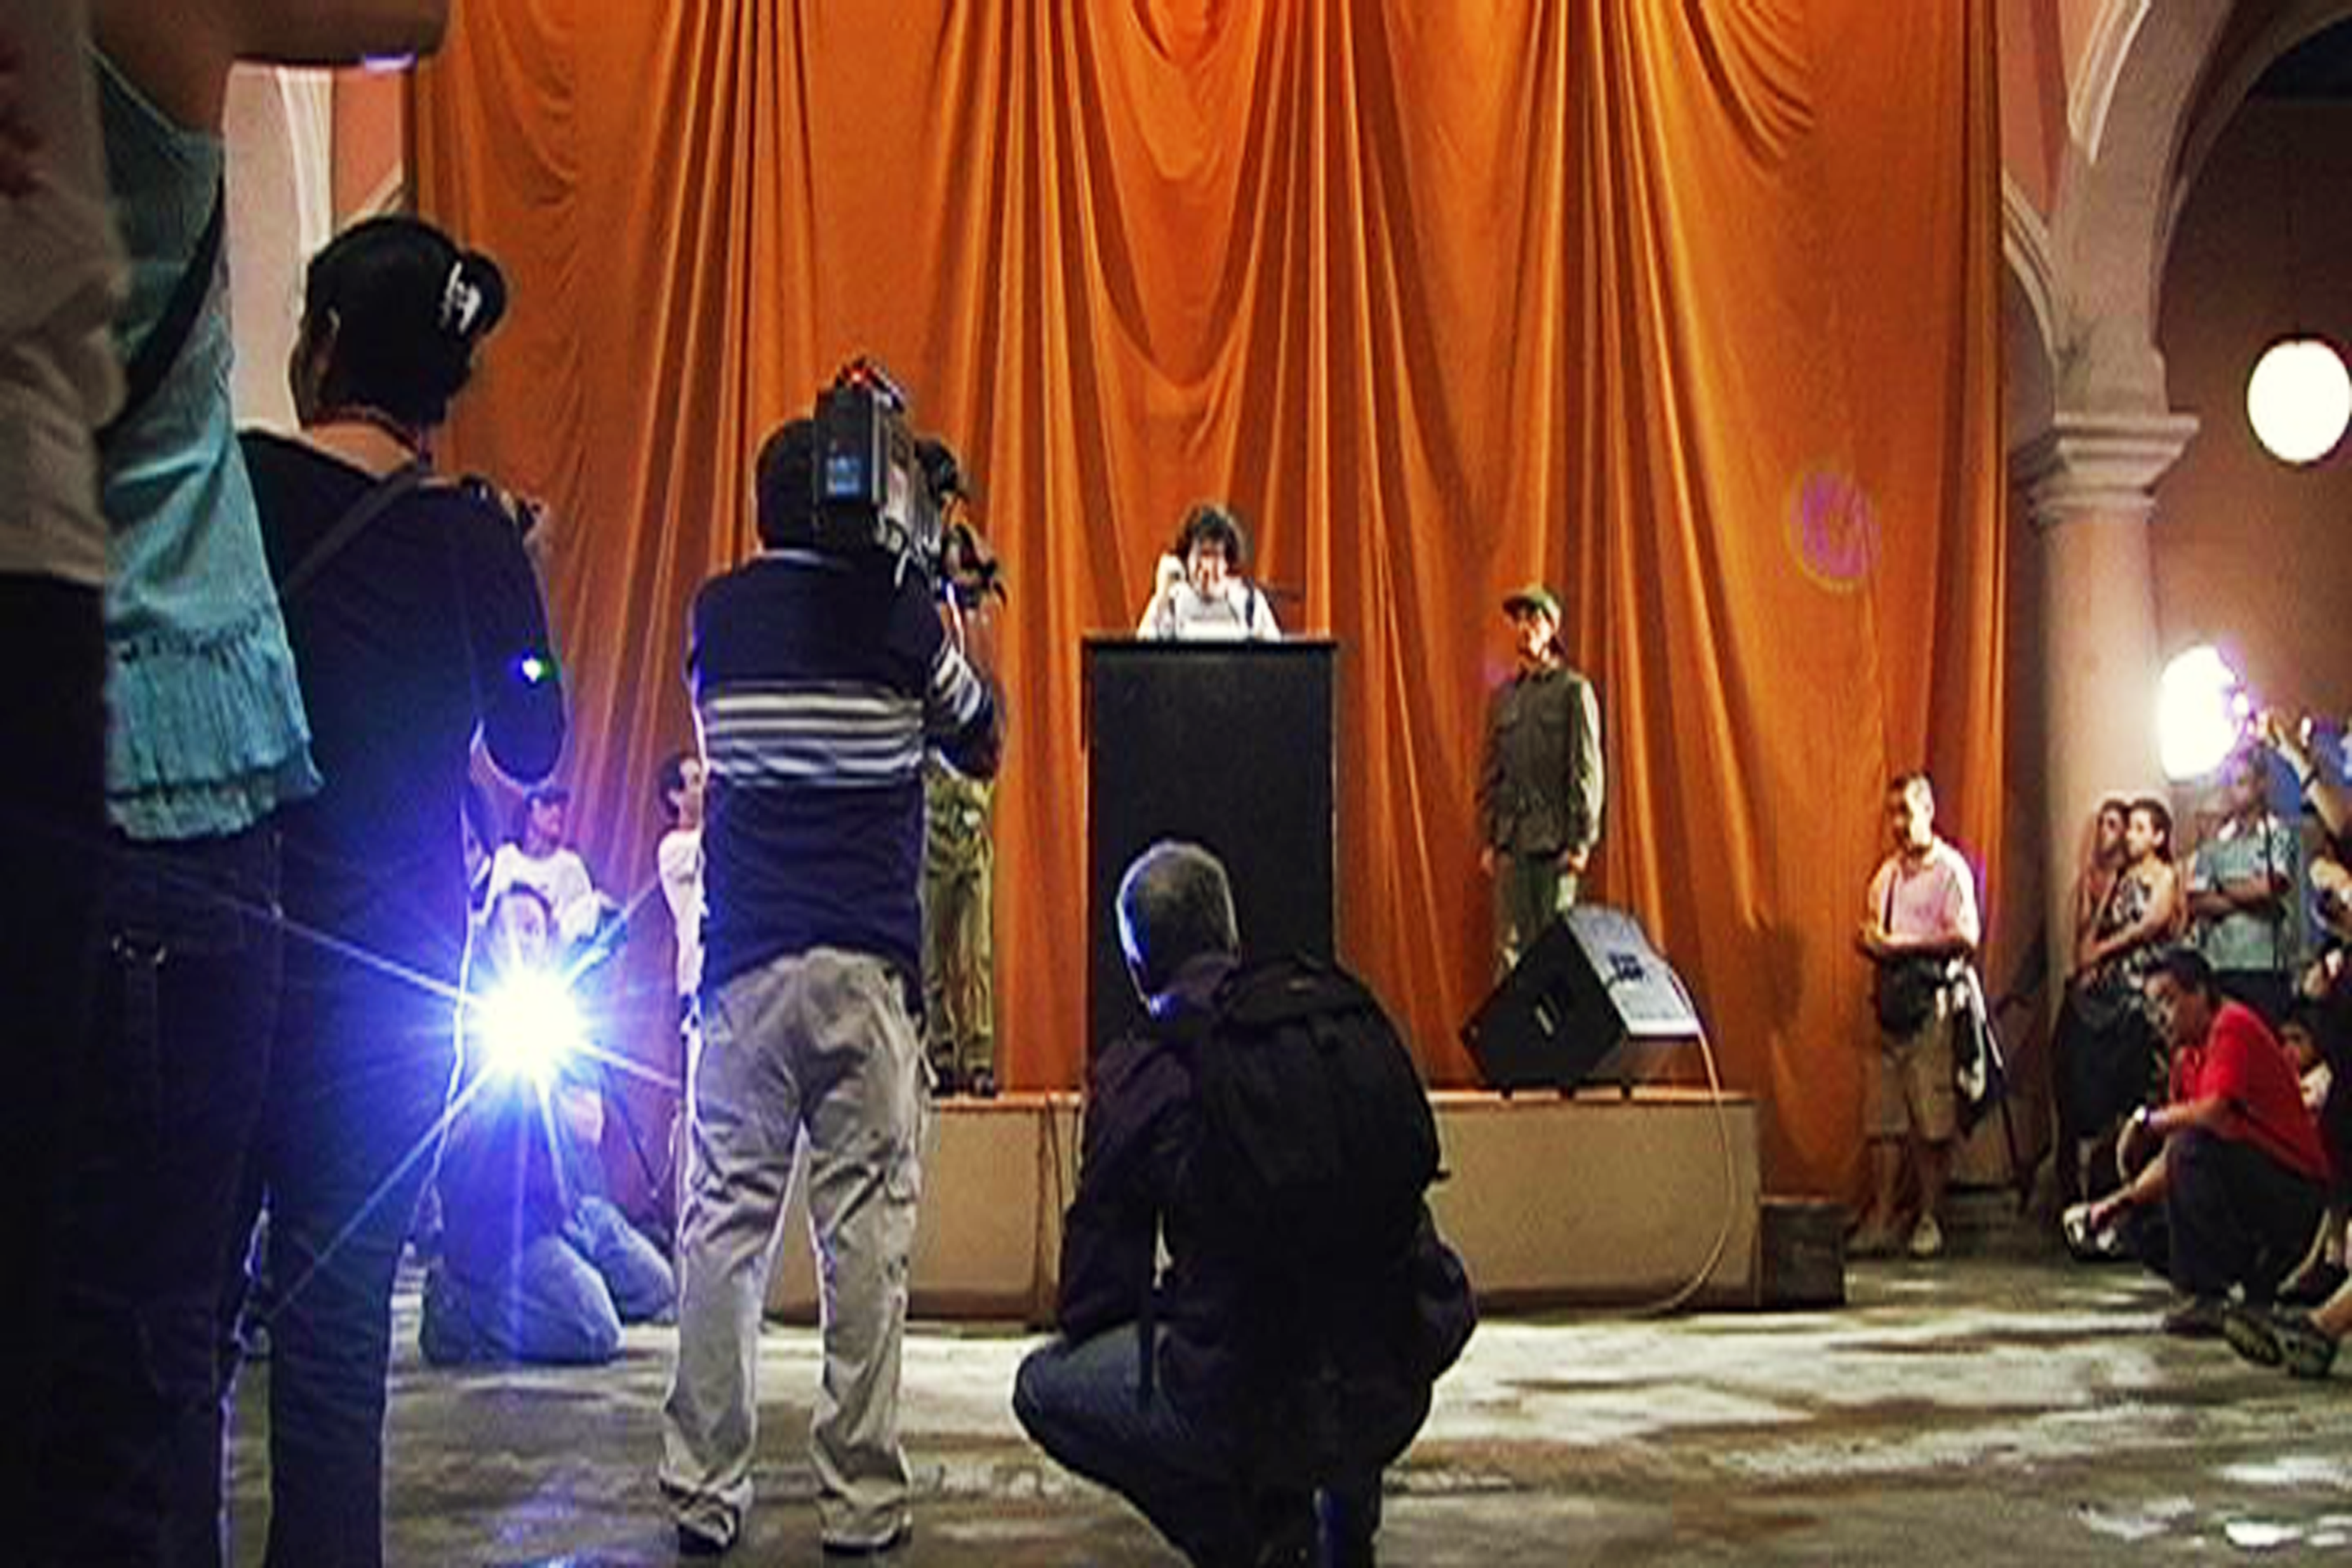 A podium stands in front of an orange curtain, two figures dressed in army fatigues stand on either side. Spectators stand and crouch around the stage, some taking photos and recording.